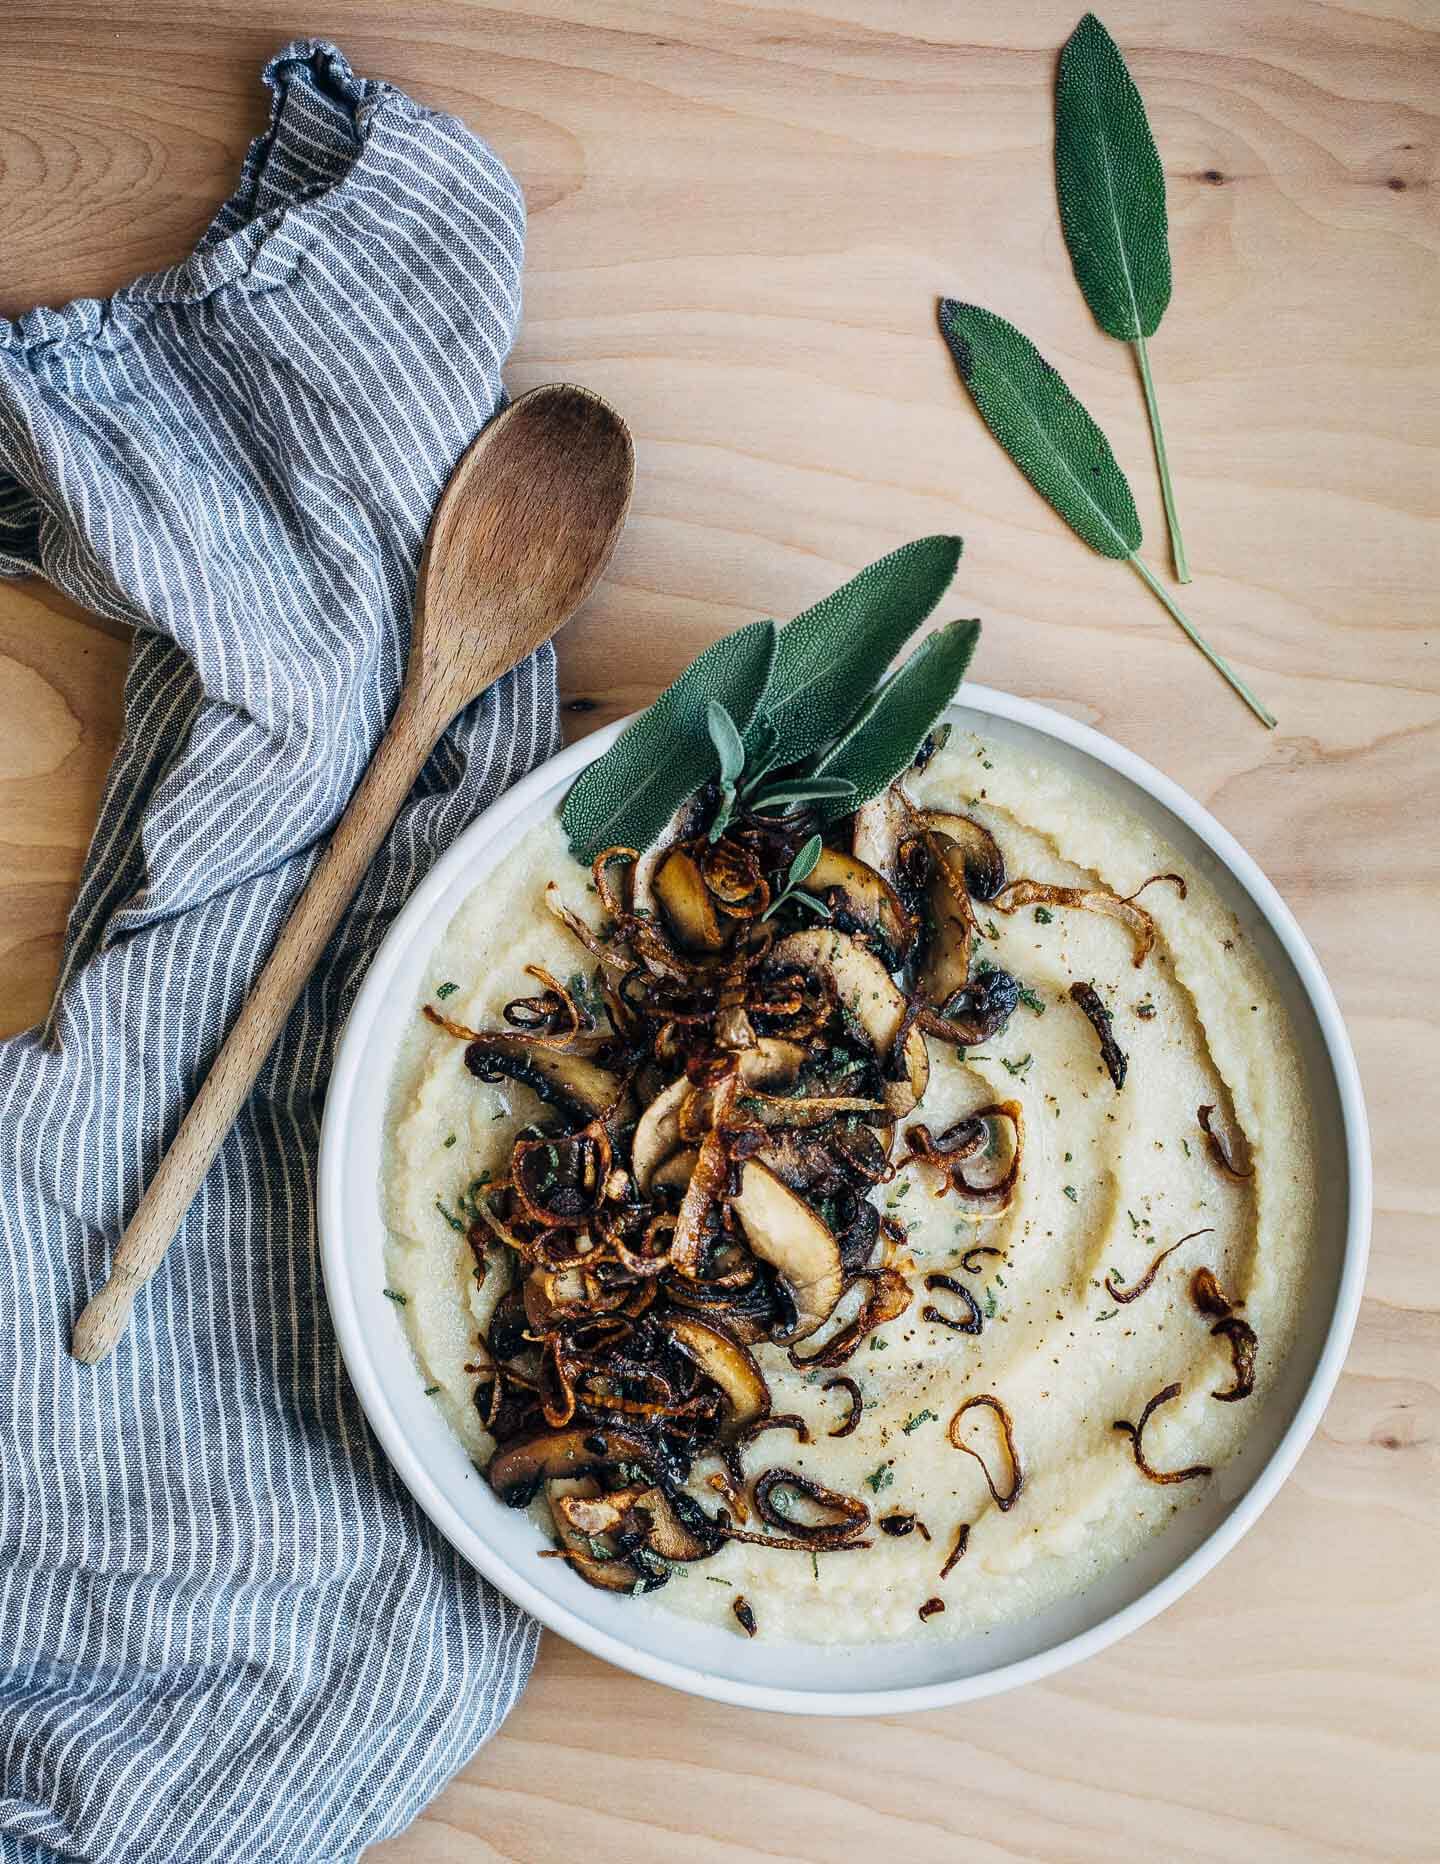 Silky, intensely flavorful cauliflower puree topped with garlicky sautéed mushrooms and frizzled shallots. 